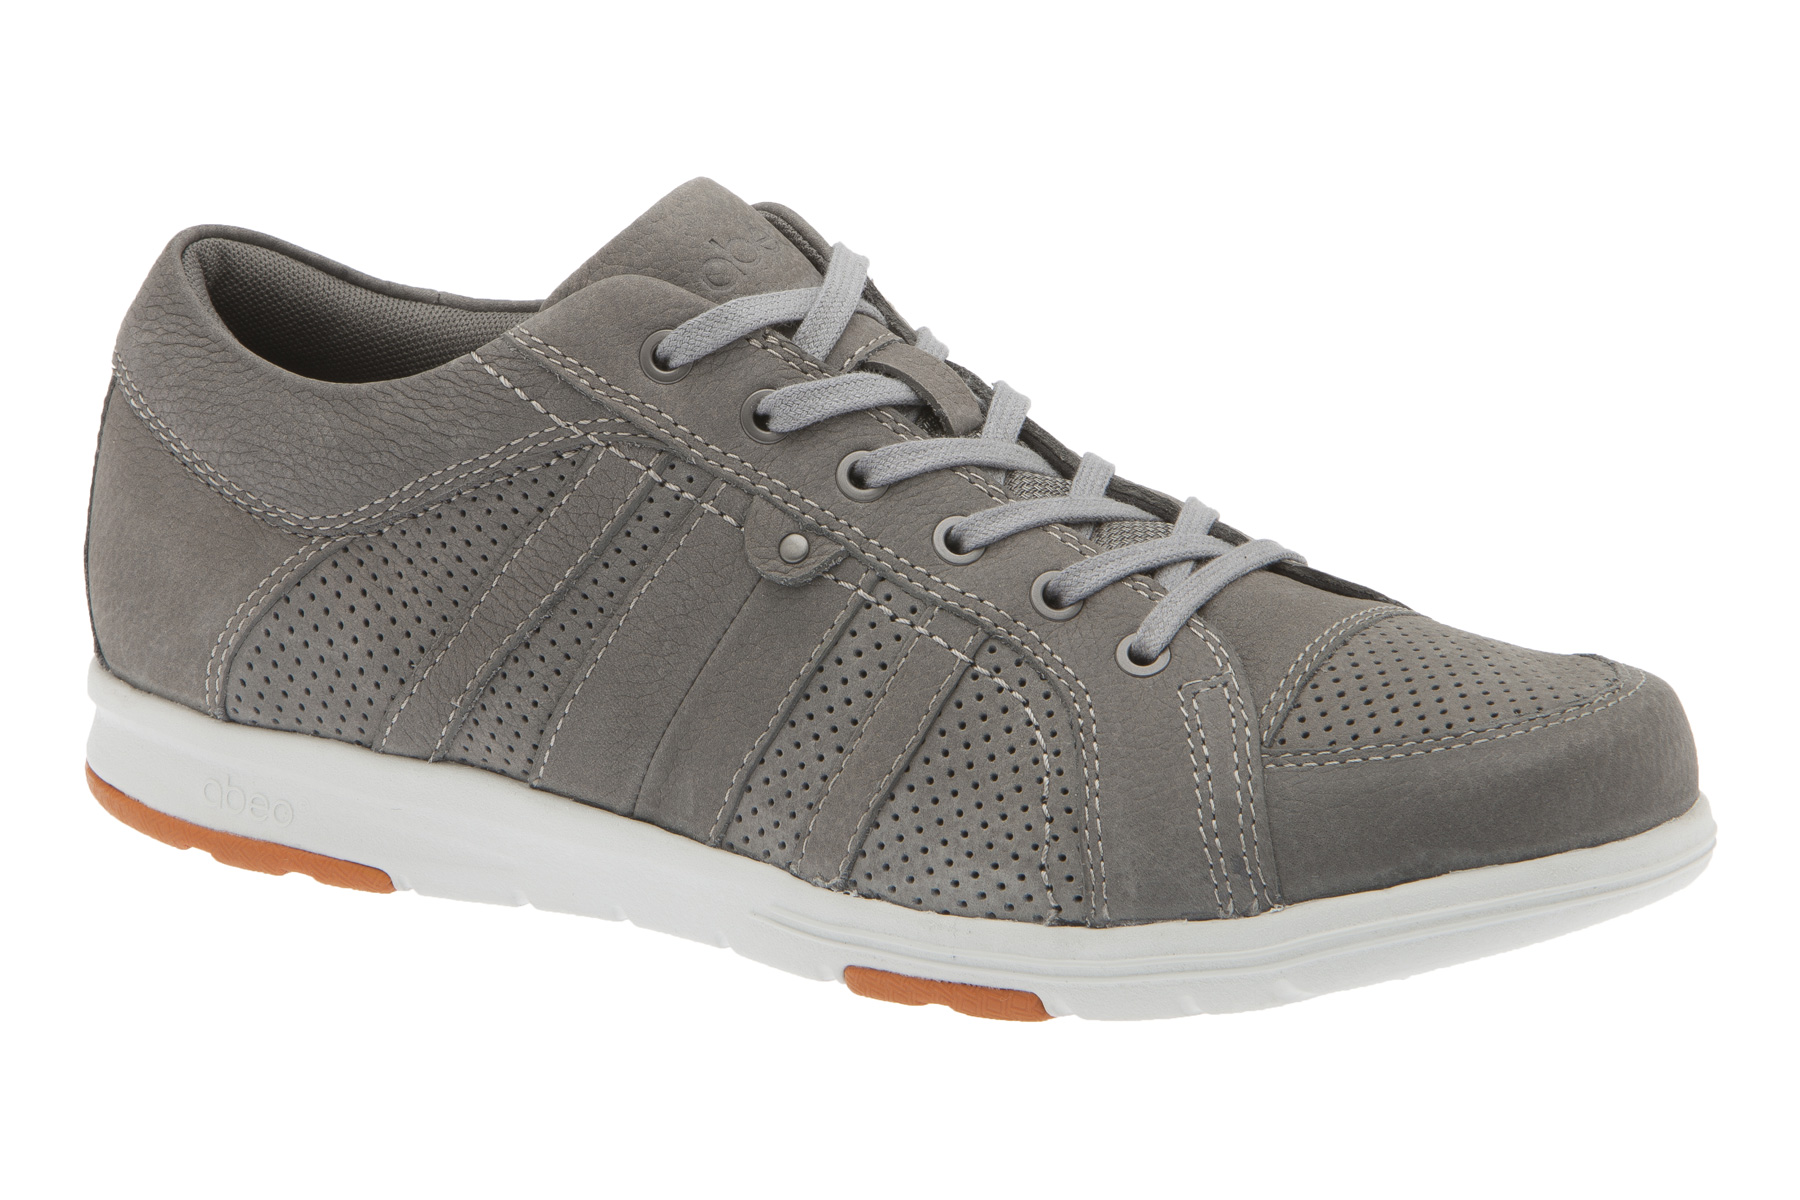 ABEO  Cort - Casual Shoes in Grey - image 1 of 6